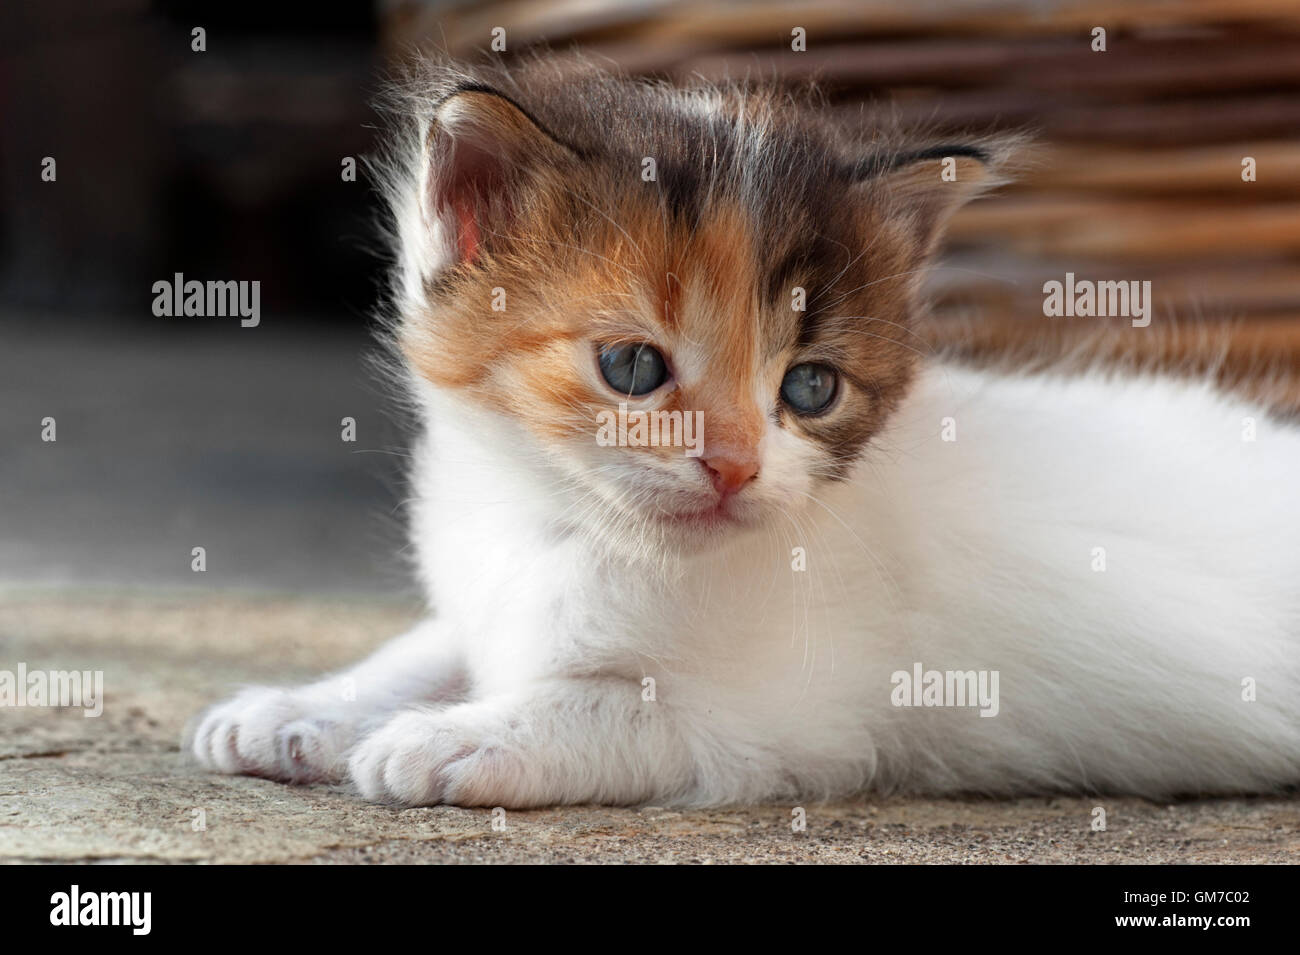 Four weeks old kitten lying outdoors Stock Photo